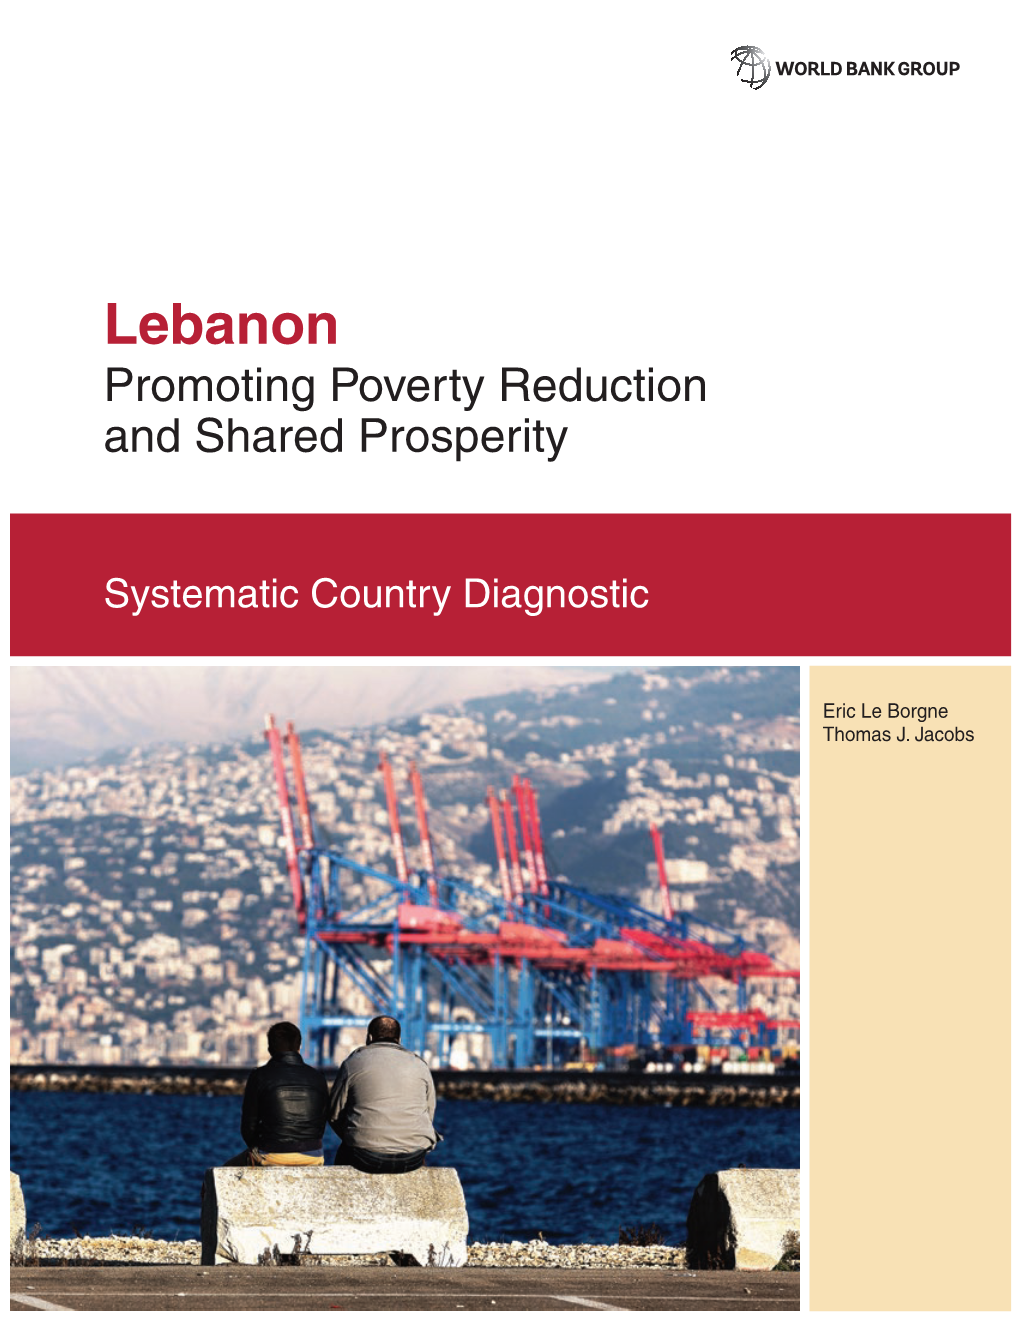 Lebanon Promoting Poverty Reduction and Shared Prosperity